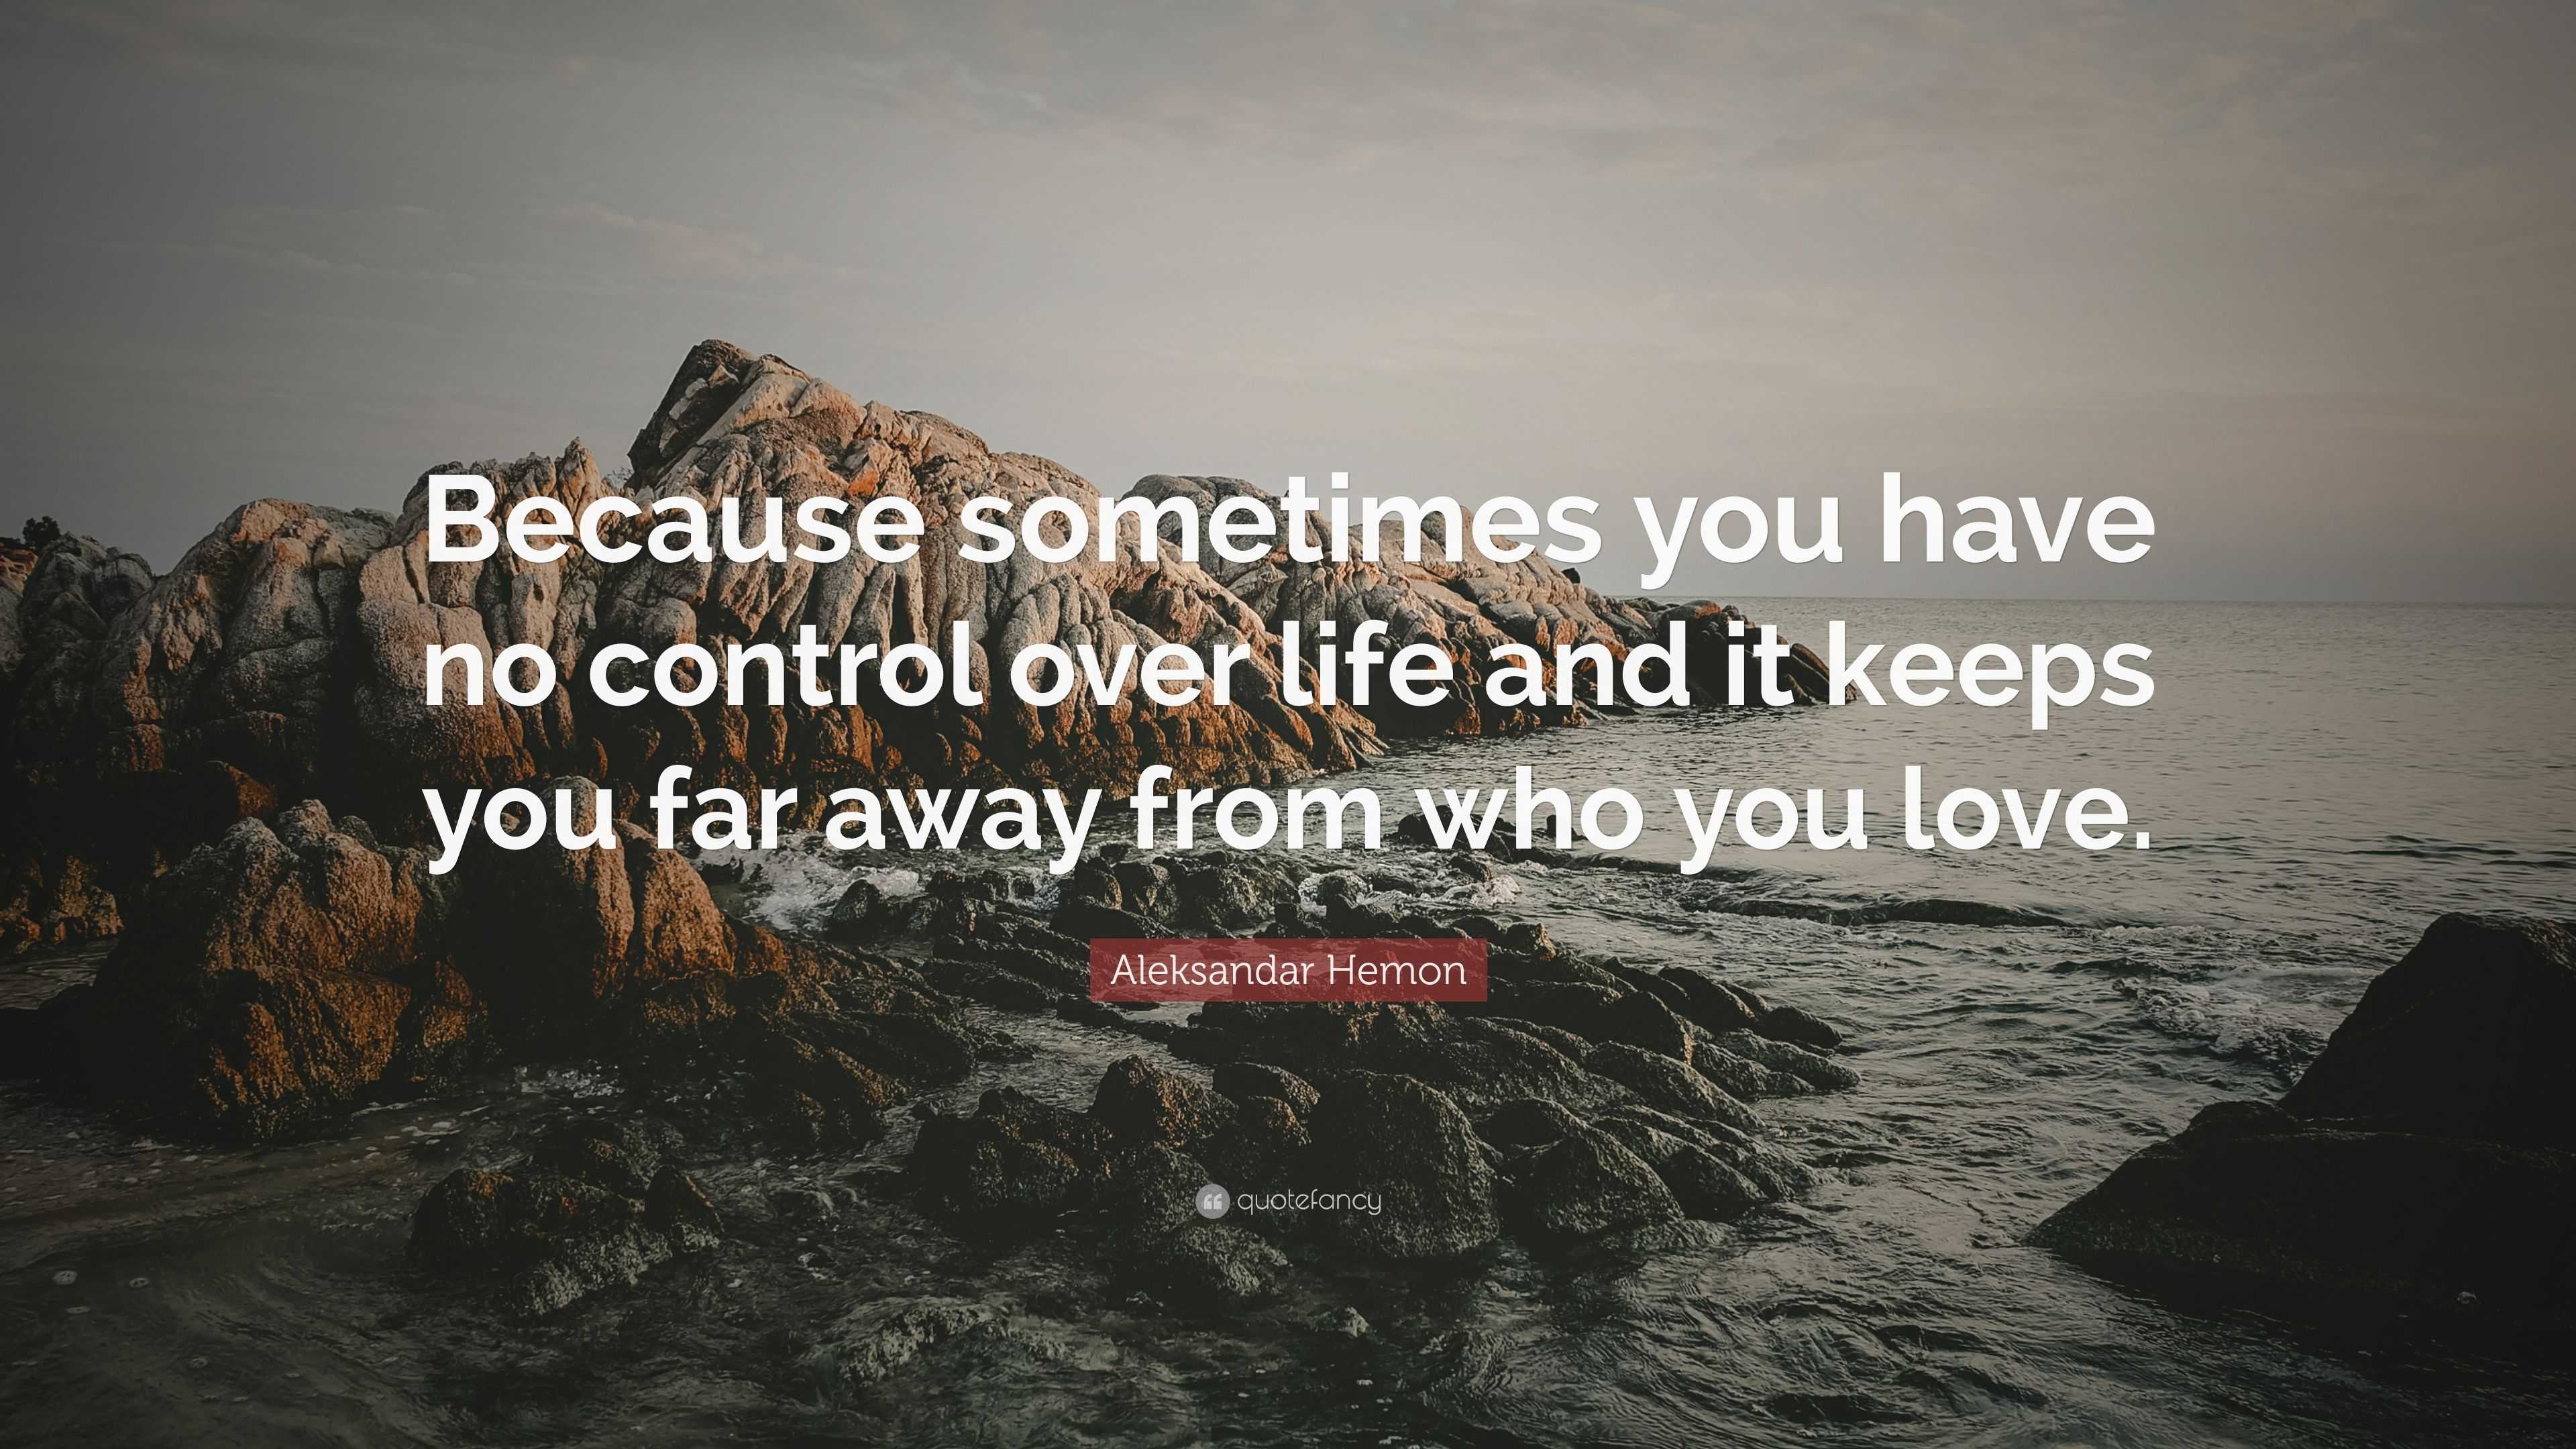 Aleksandar Hemon Quote: “Because sometimes you have no control over ...